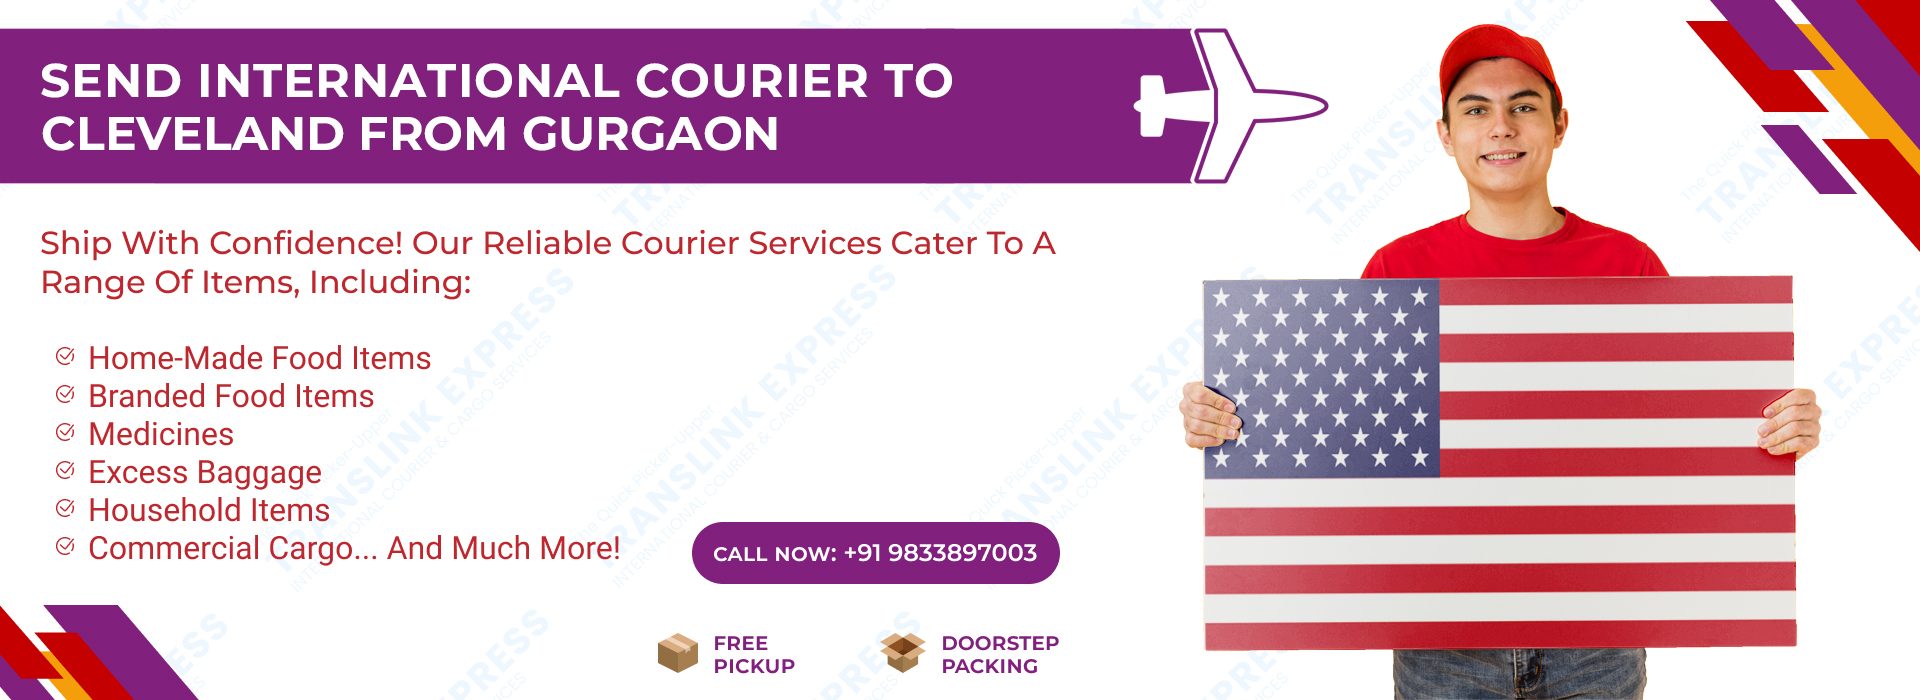 Courier to Cleveland From Gurgaon